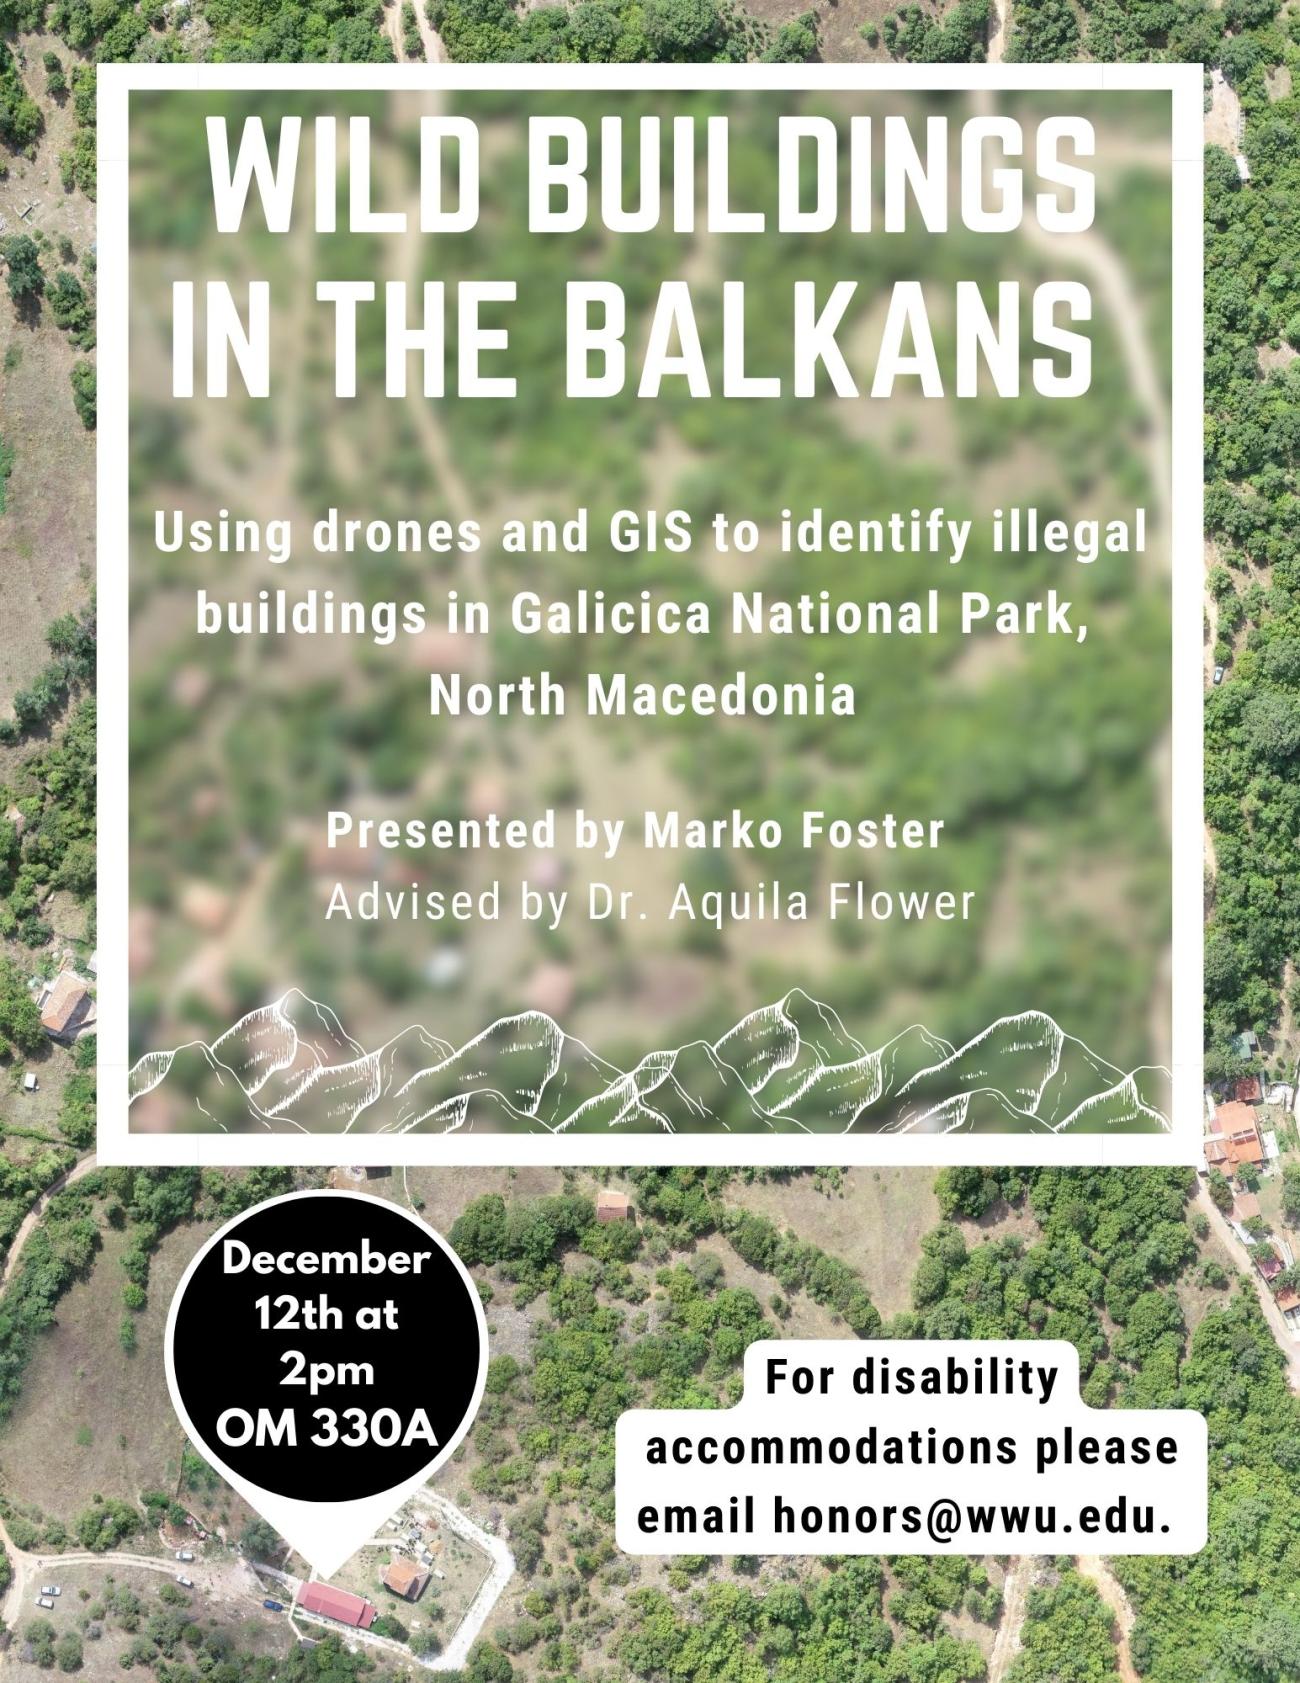  Open configuration options Drone image background containing a frame with the blurred drone image with the title, name of presenter, advisor, and a graphic of mountains. The text reads "Wild Buildings in the Balkans: Using drones and GIS to identify illegal buildings in Galicica National Park, North Macedonia. Presented by Marko Foster. Advised by Dr. Aquila Flower." Below the frame is a circle frame pointing at a building on the drone image that reads "December 12th at 2 pm, OM 330A." 